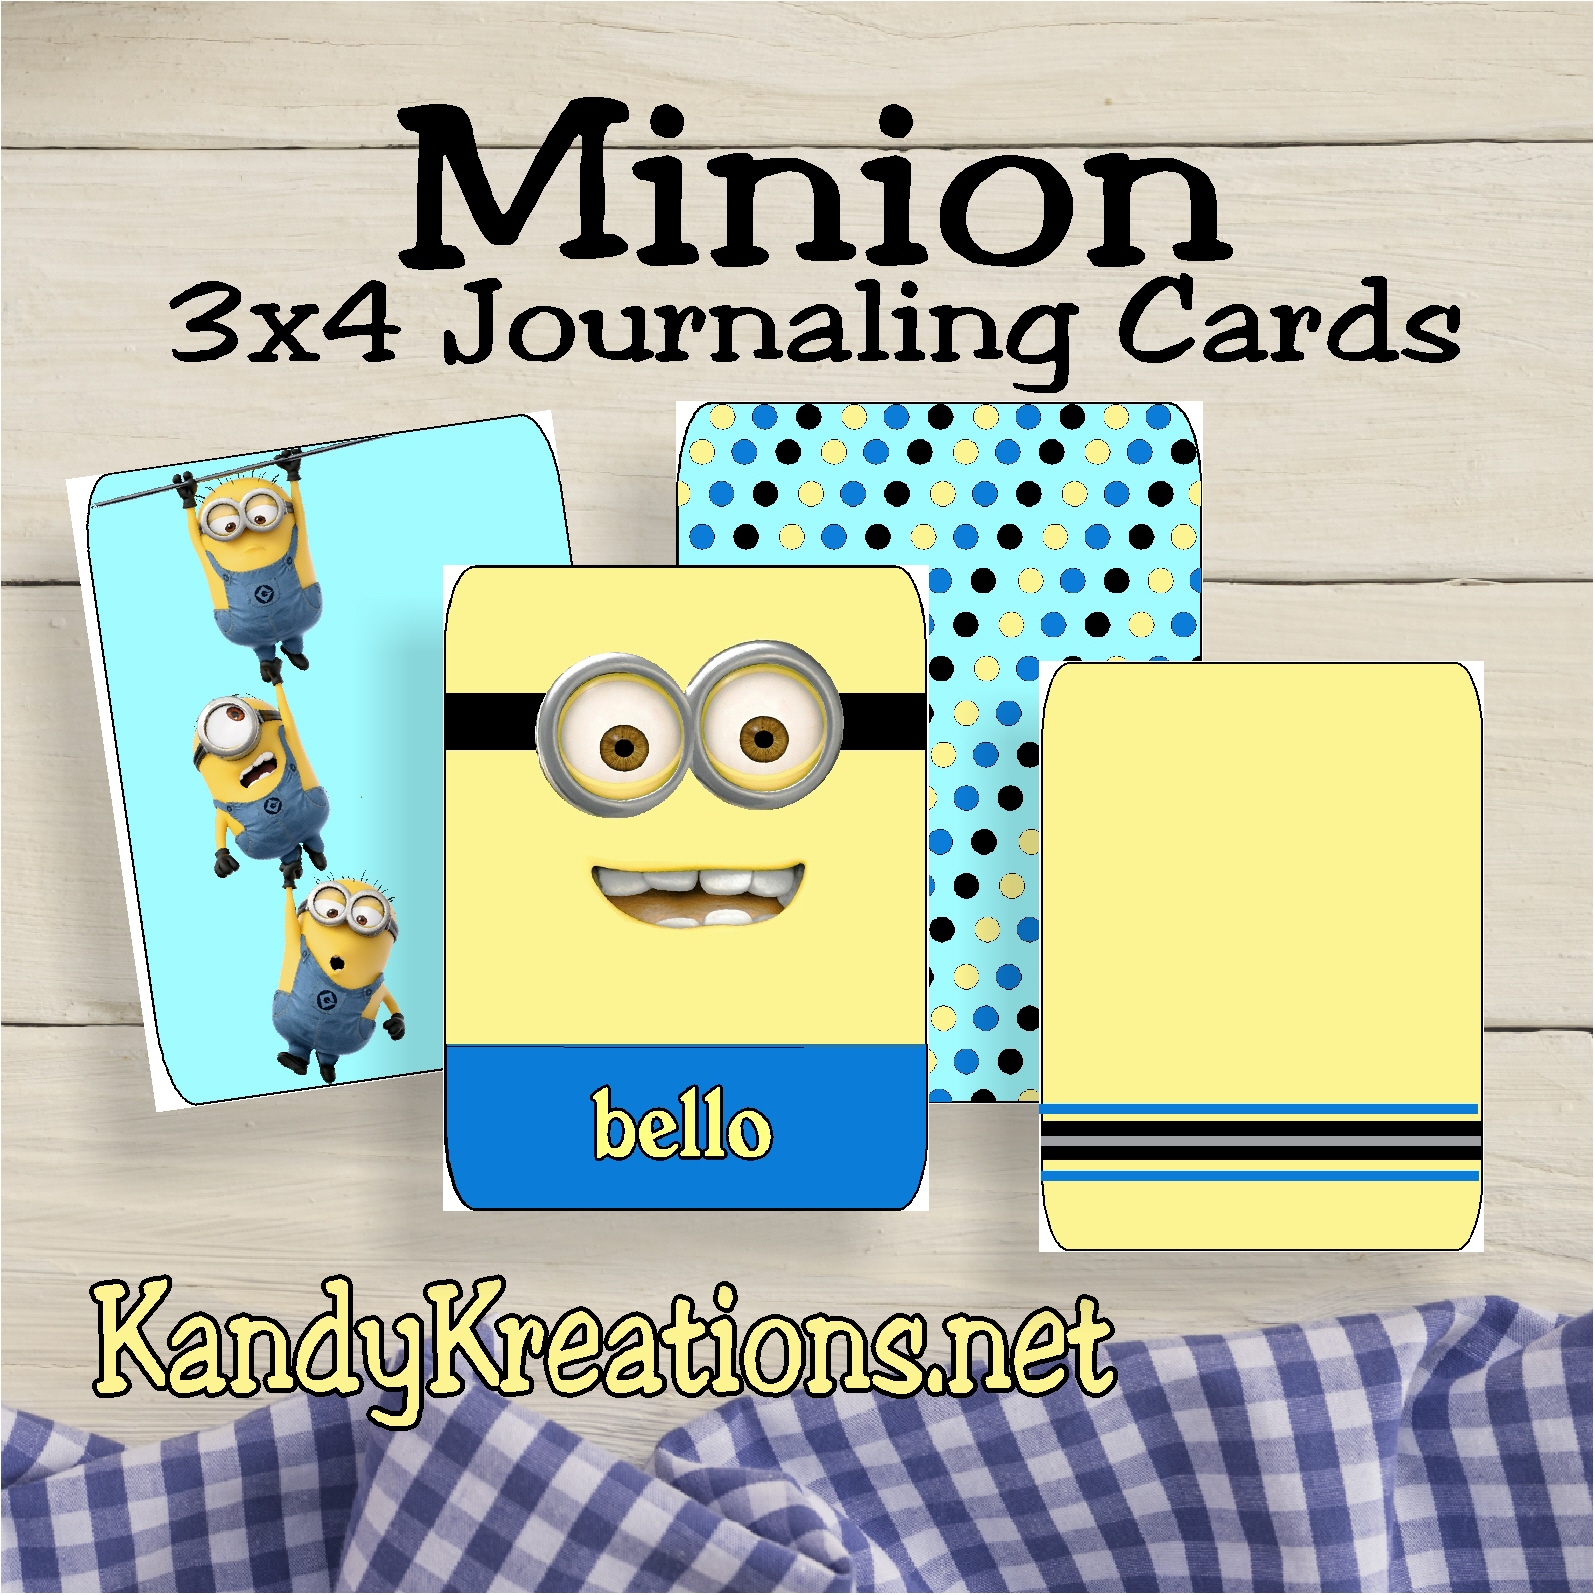 http://www.kandykreations.net/2015/07/minion-movie-journaling-cards.html